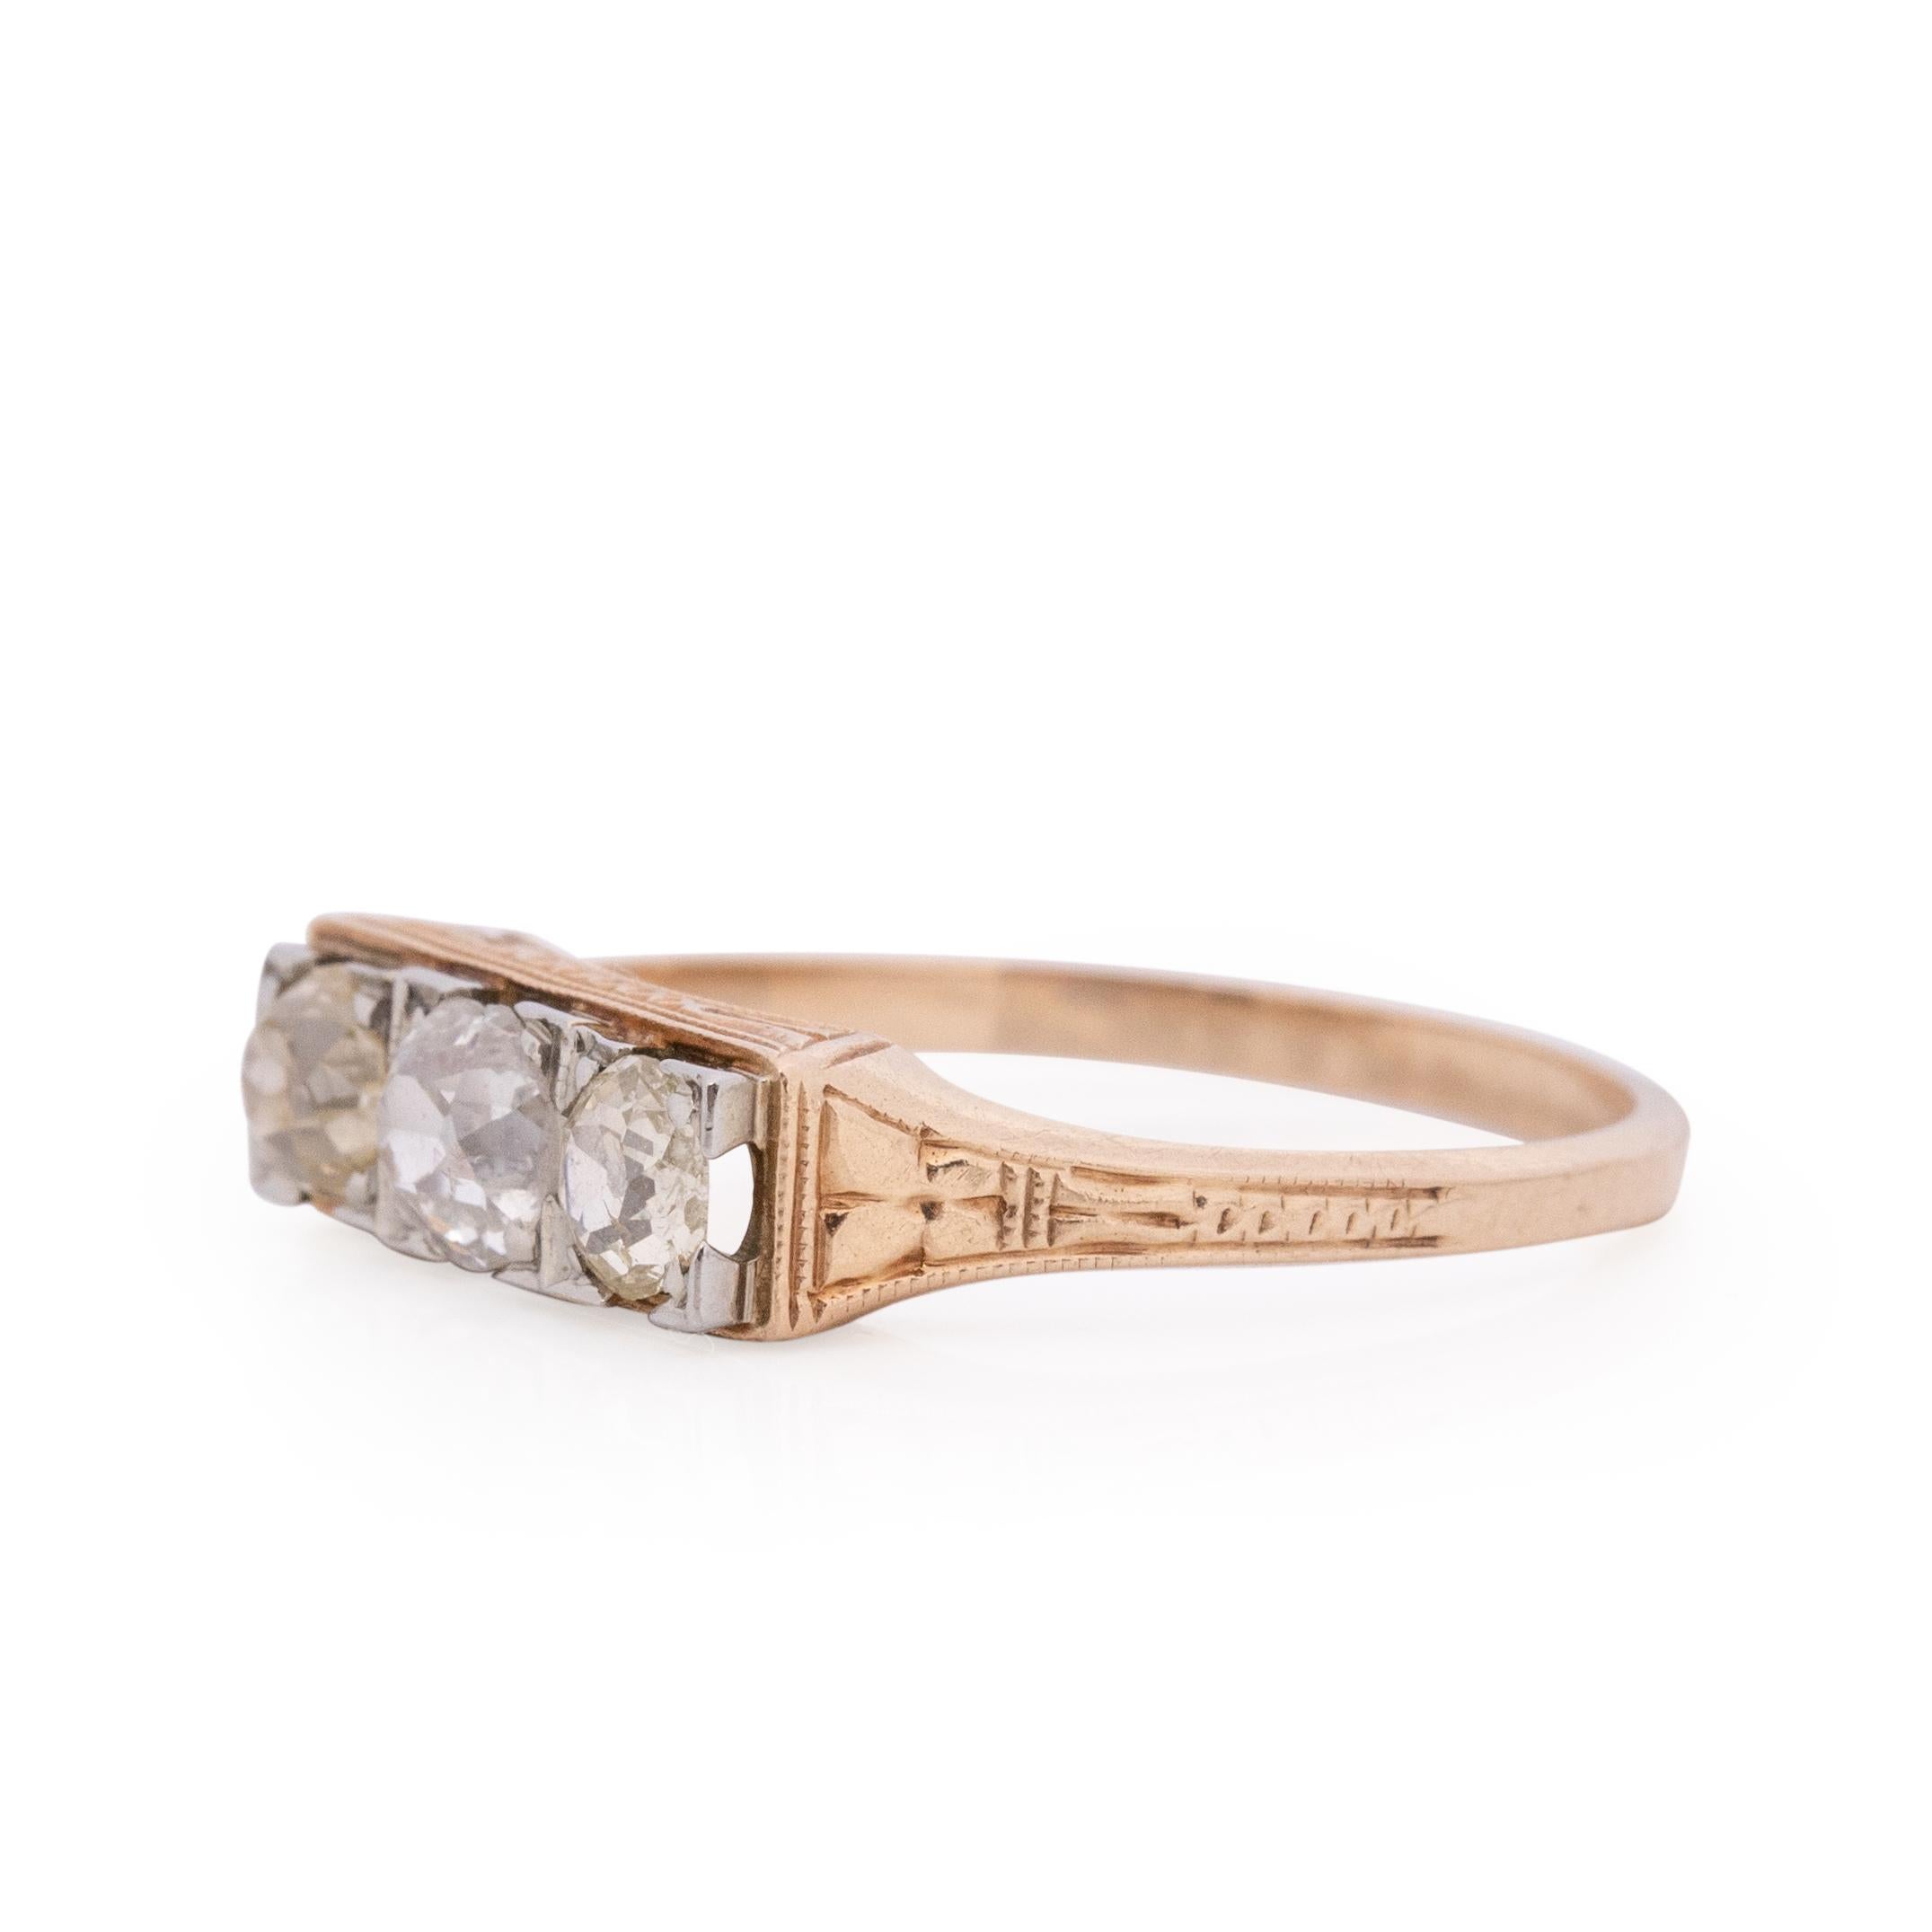 This three stone beauty is a true work of art. The chunky cut diamonds sit in white gold prongs, the gallery is held up by hand engraved yellow gold. The geometric design along the top reaches about half way done the shank, adding beautiful delicate